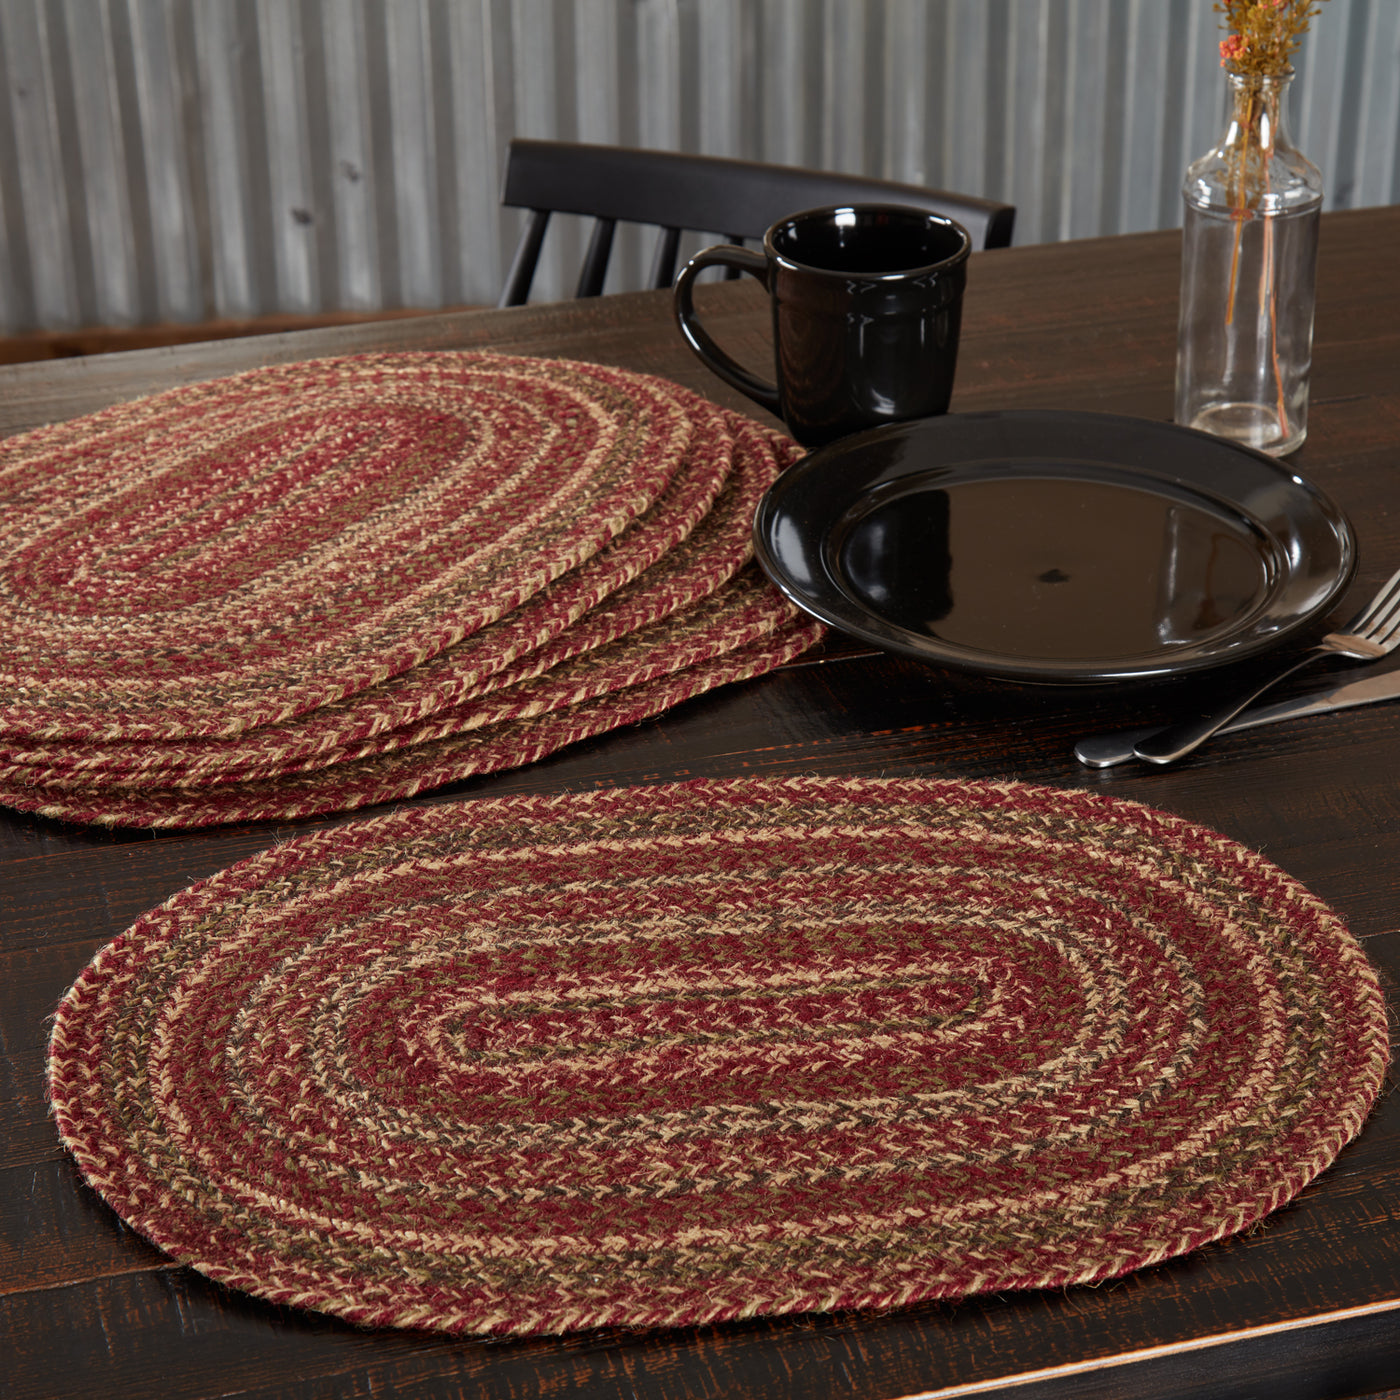 Set of 6 Cider Mill Jute Placemats 12'' x 18''